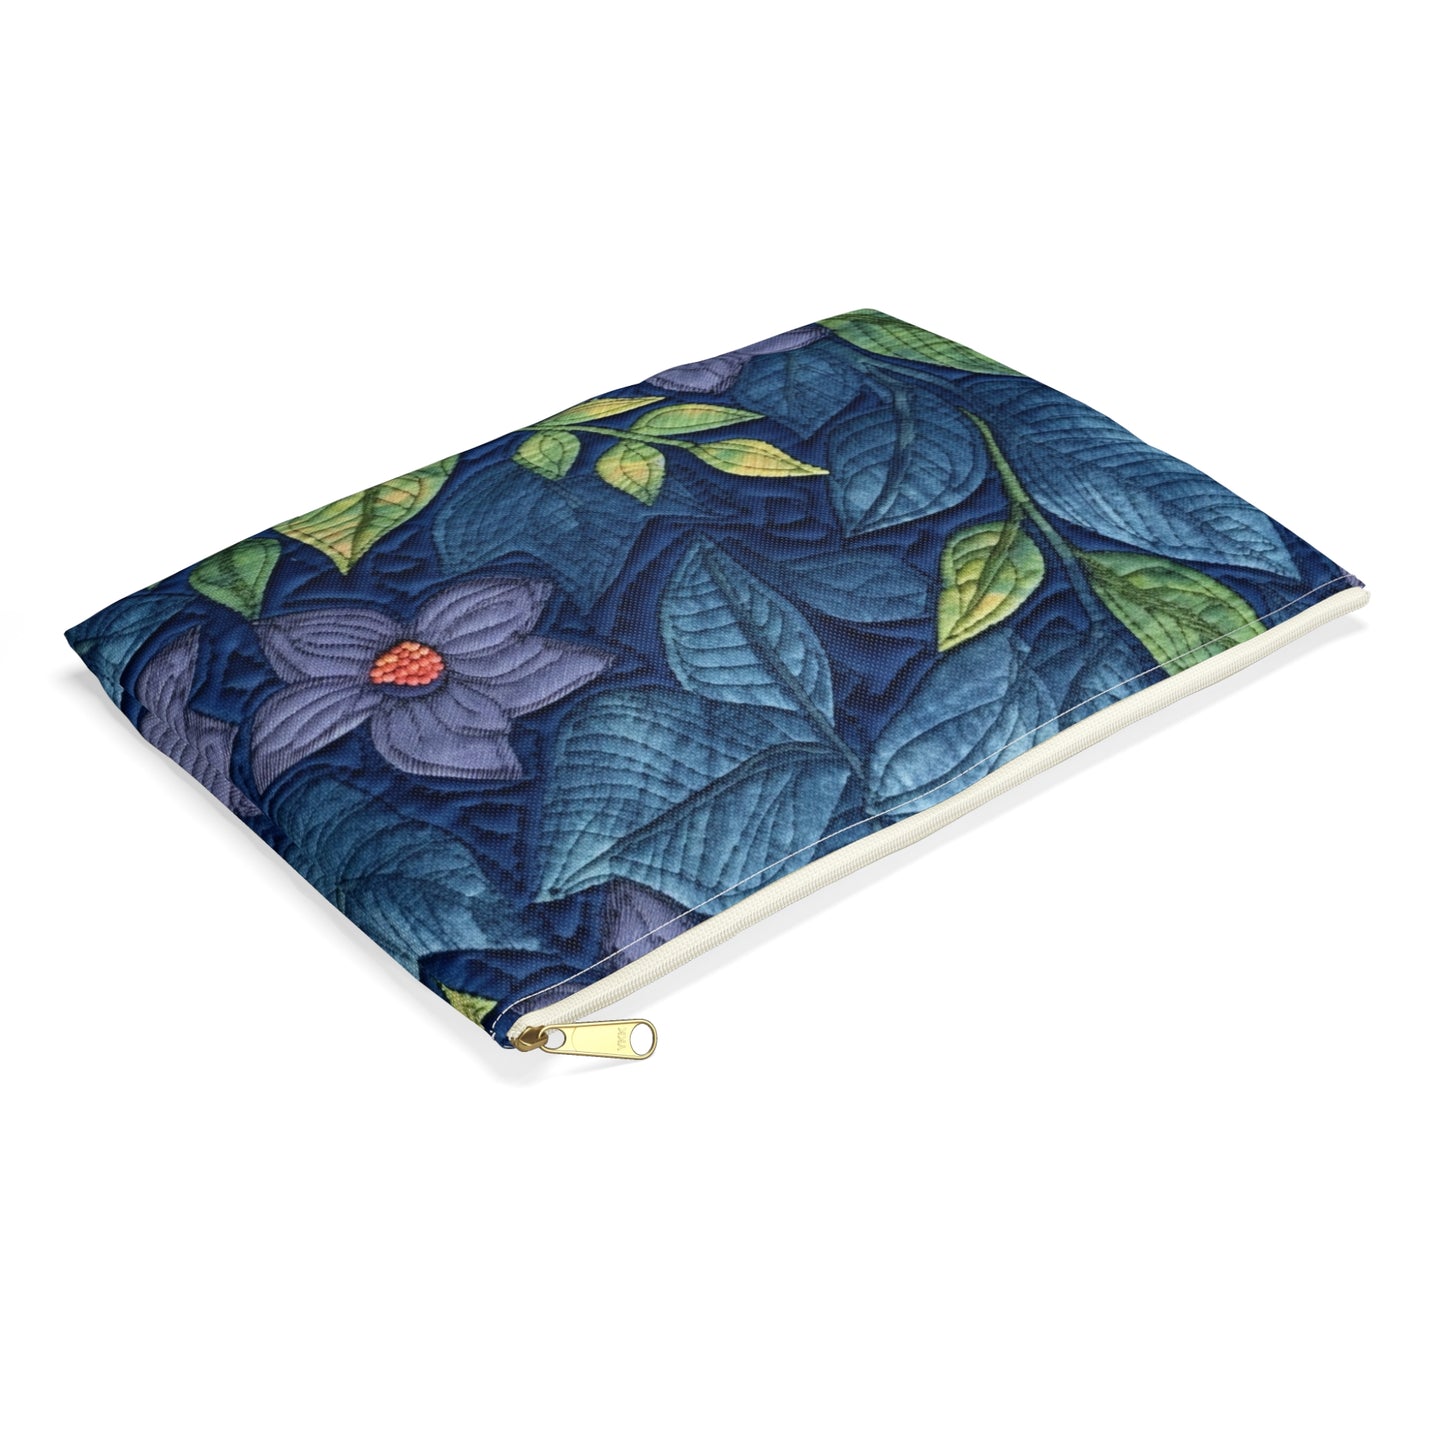 Floral Embroidery Blue: Denim-Inspired, Artisan-Crafted Flower Design - Accessory Pouch